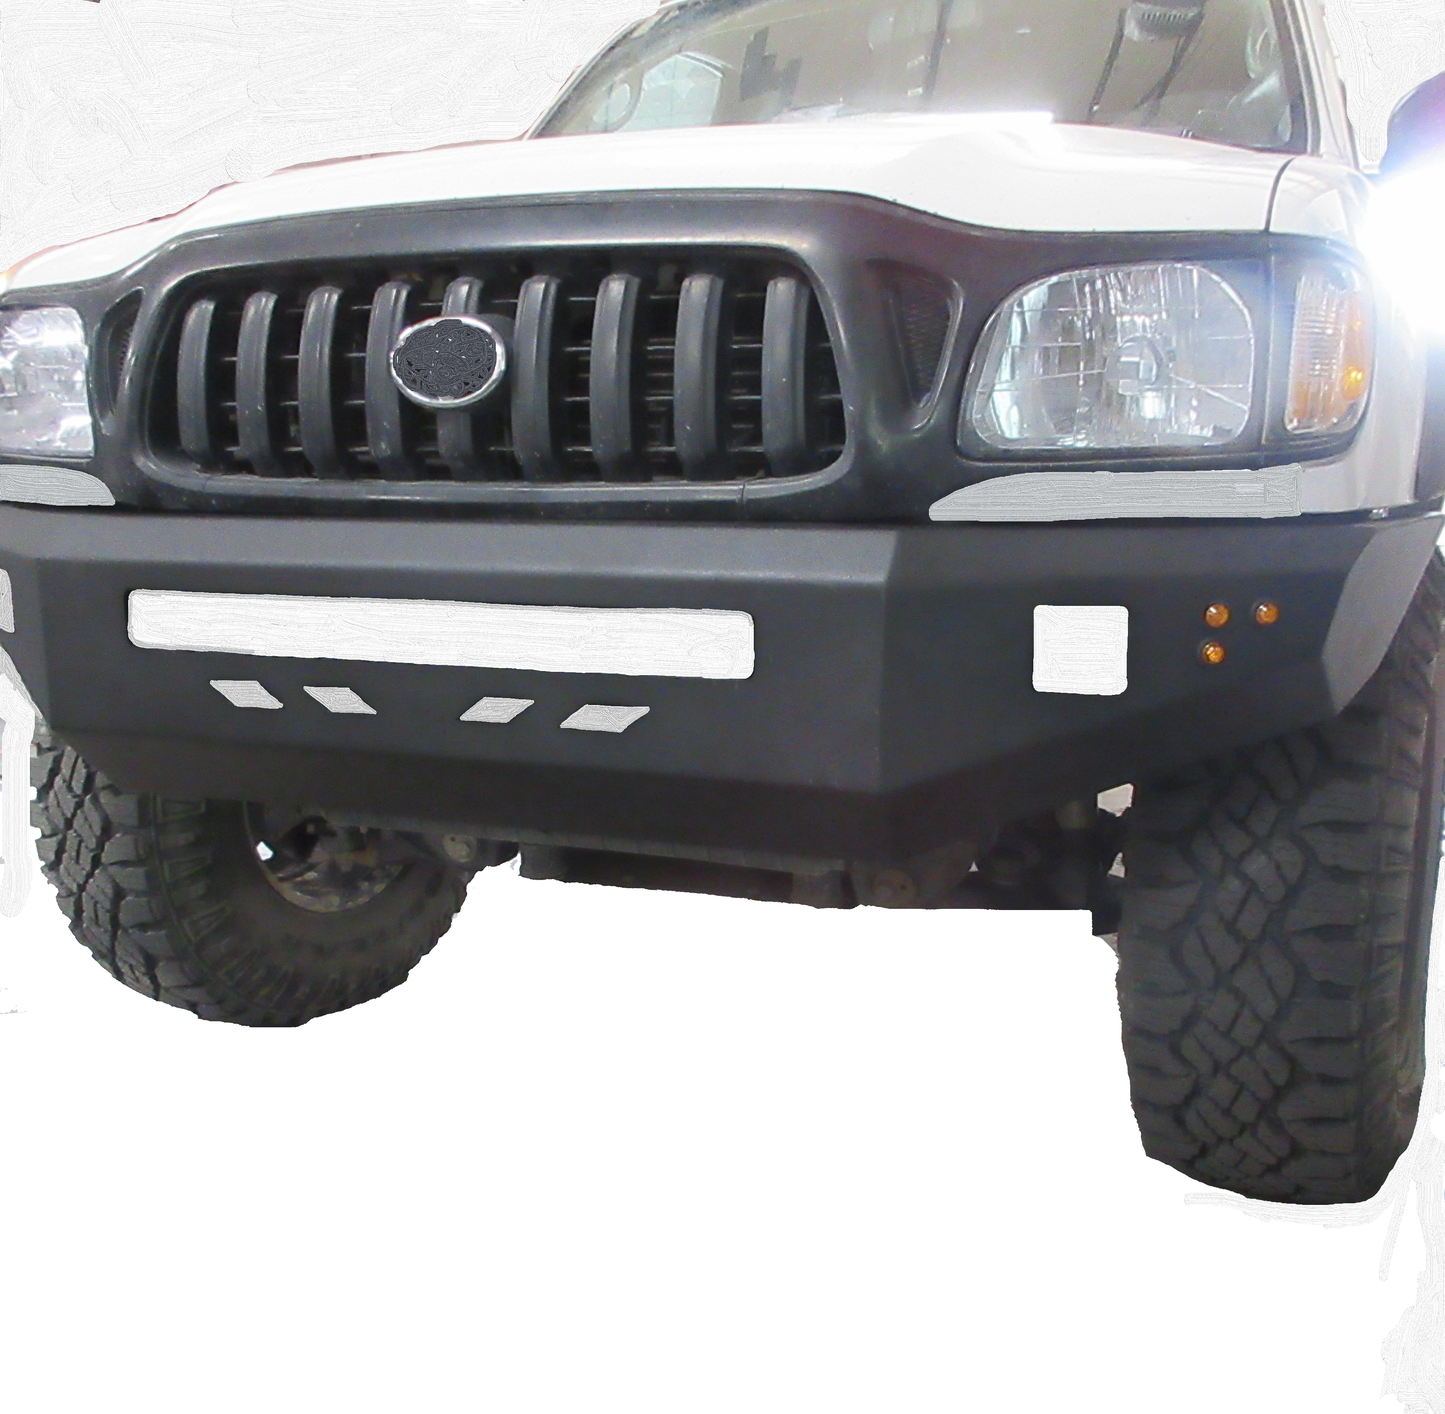 Toyota Tacoma - Off-road Steel Front Bumper First Gen 95-04